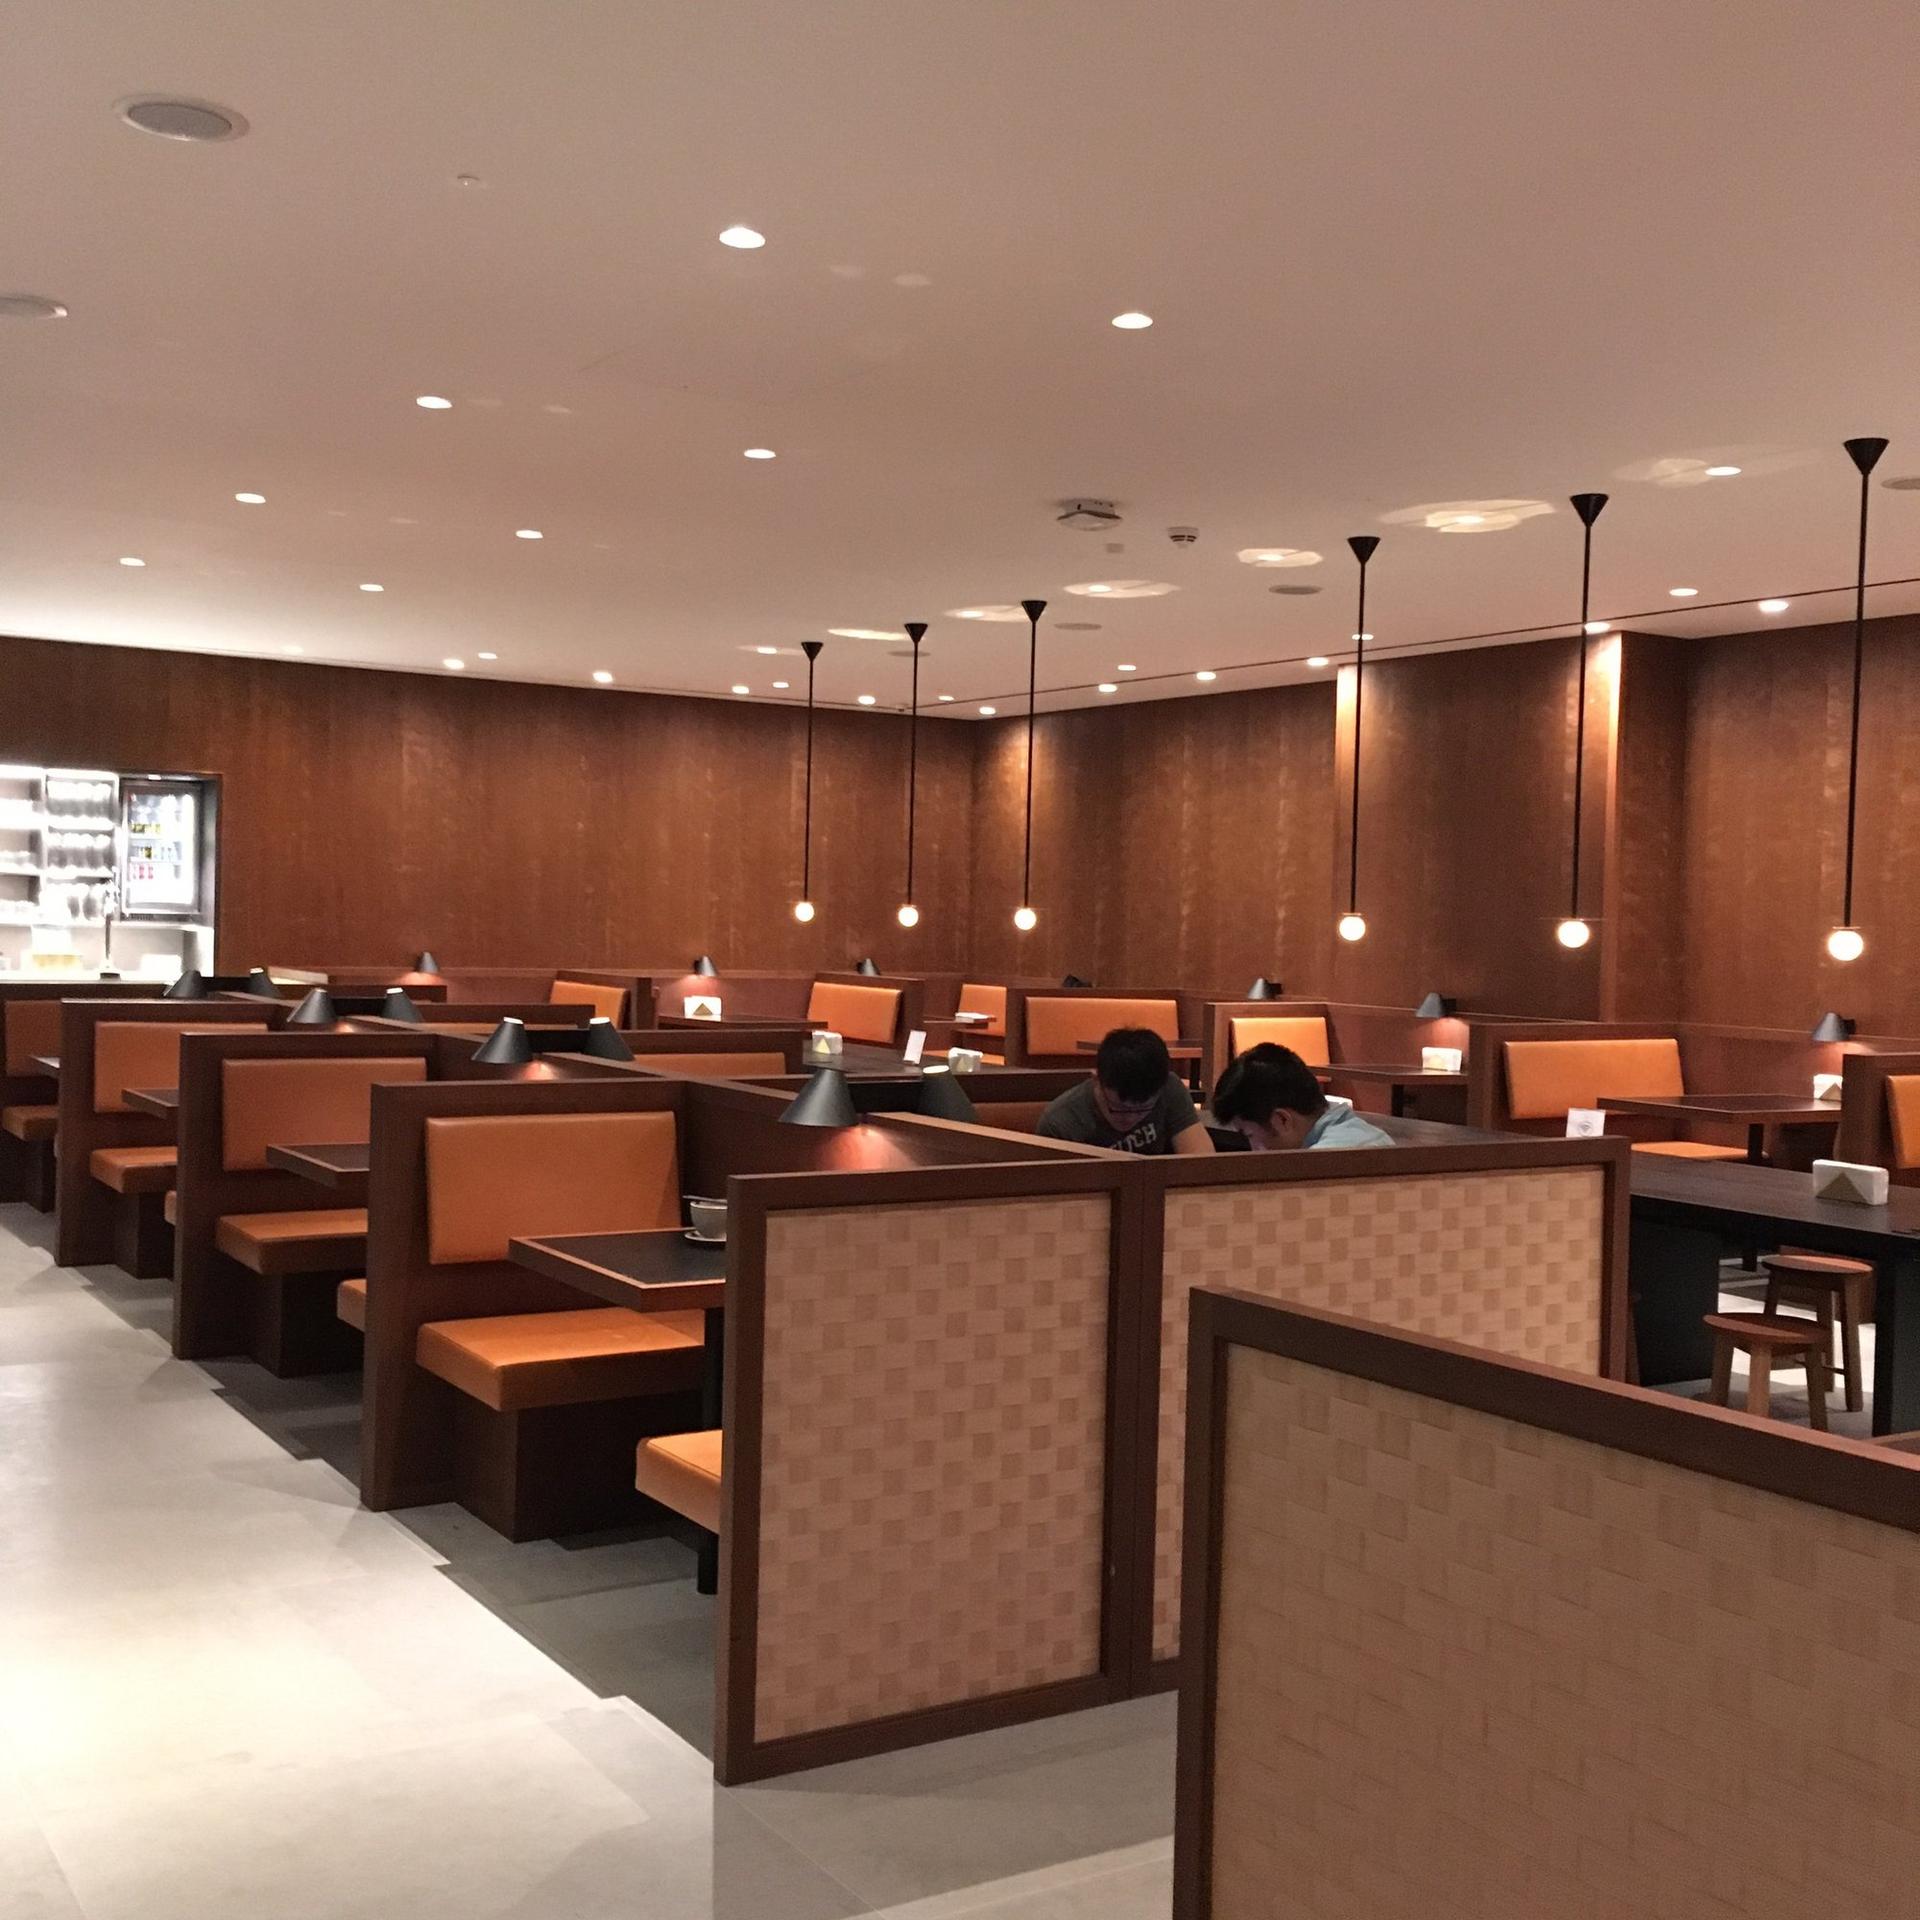 Cathay Pacific Business Class Lounge image 24 of 48